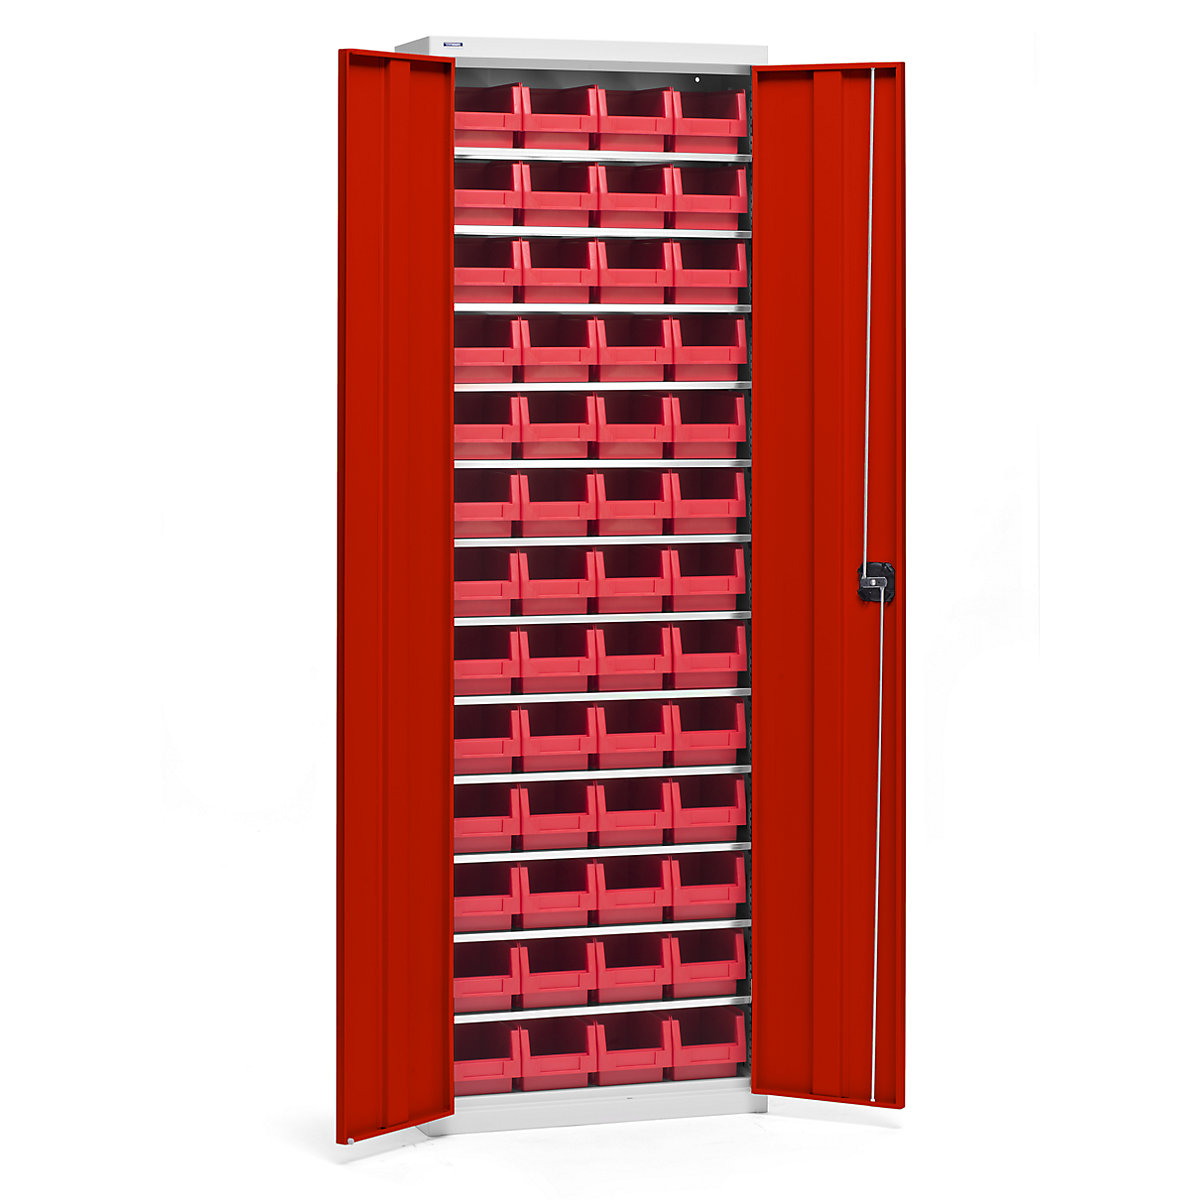 Storage cupboard with storage boxes – eurokraft pro, height 2000 mm, 12 shelves, light grey / traffic red-7